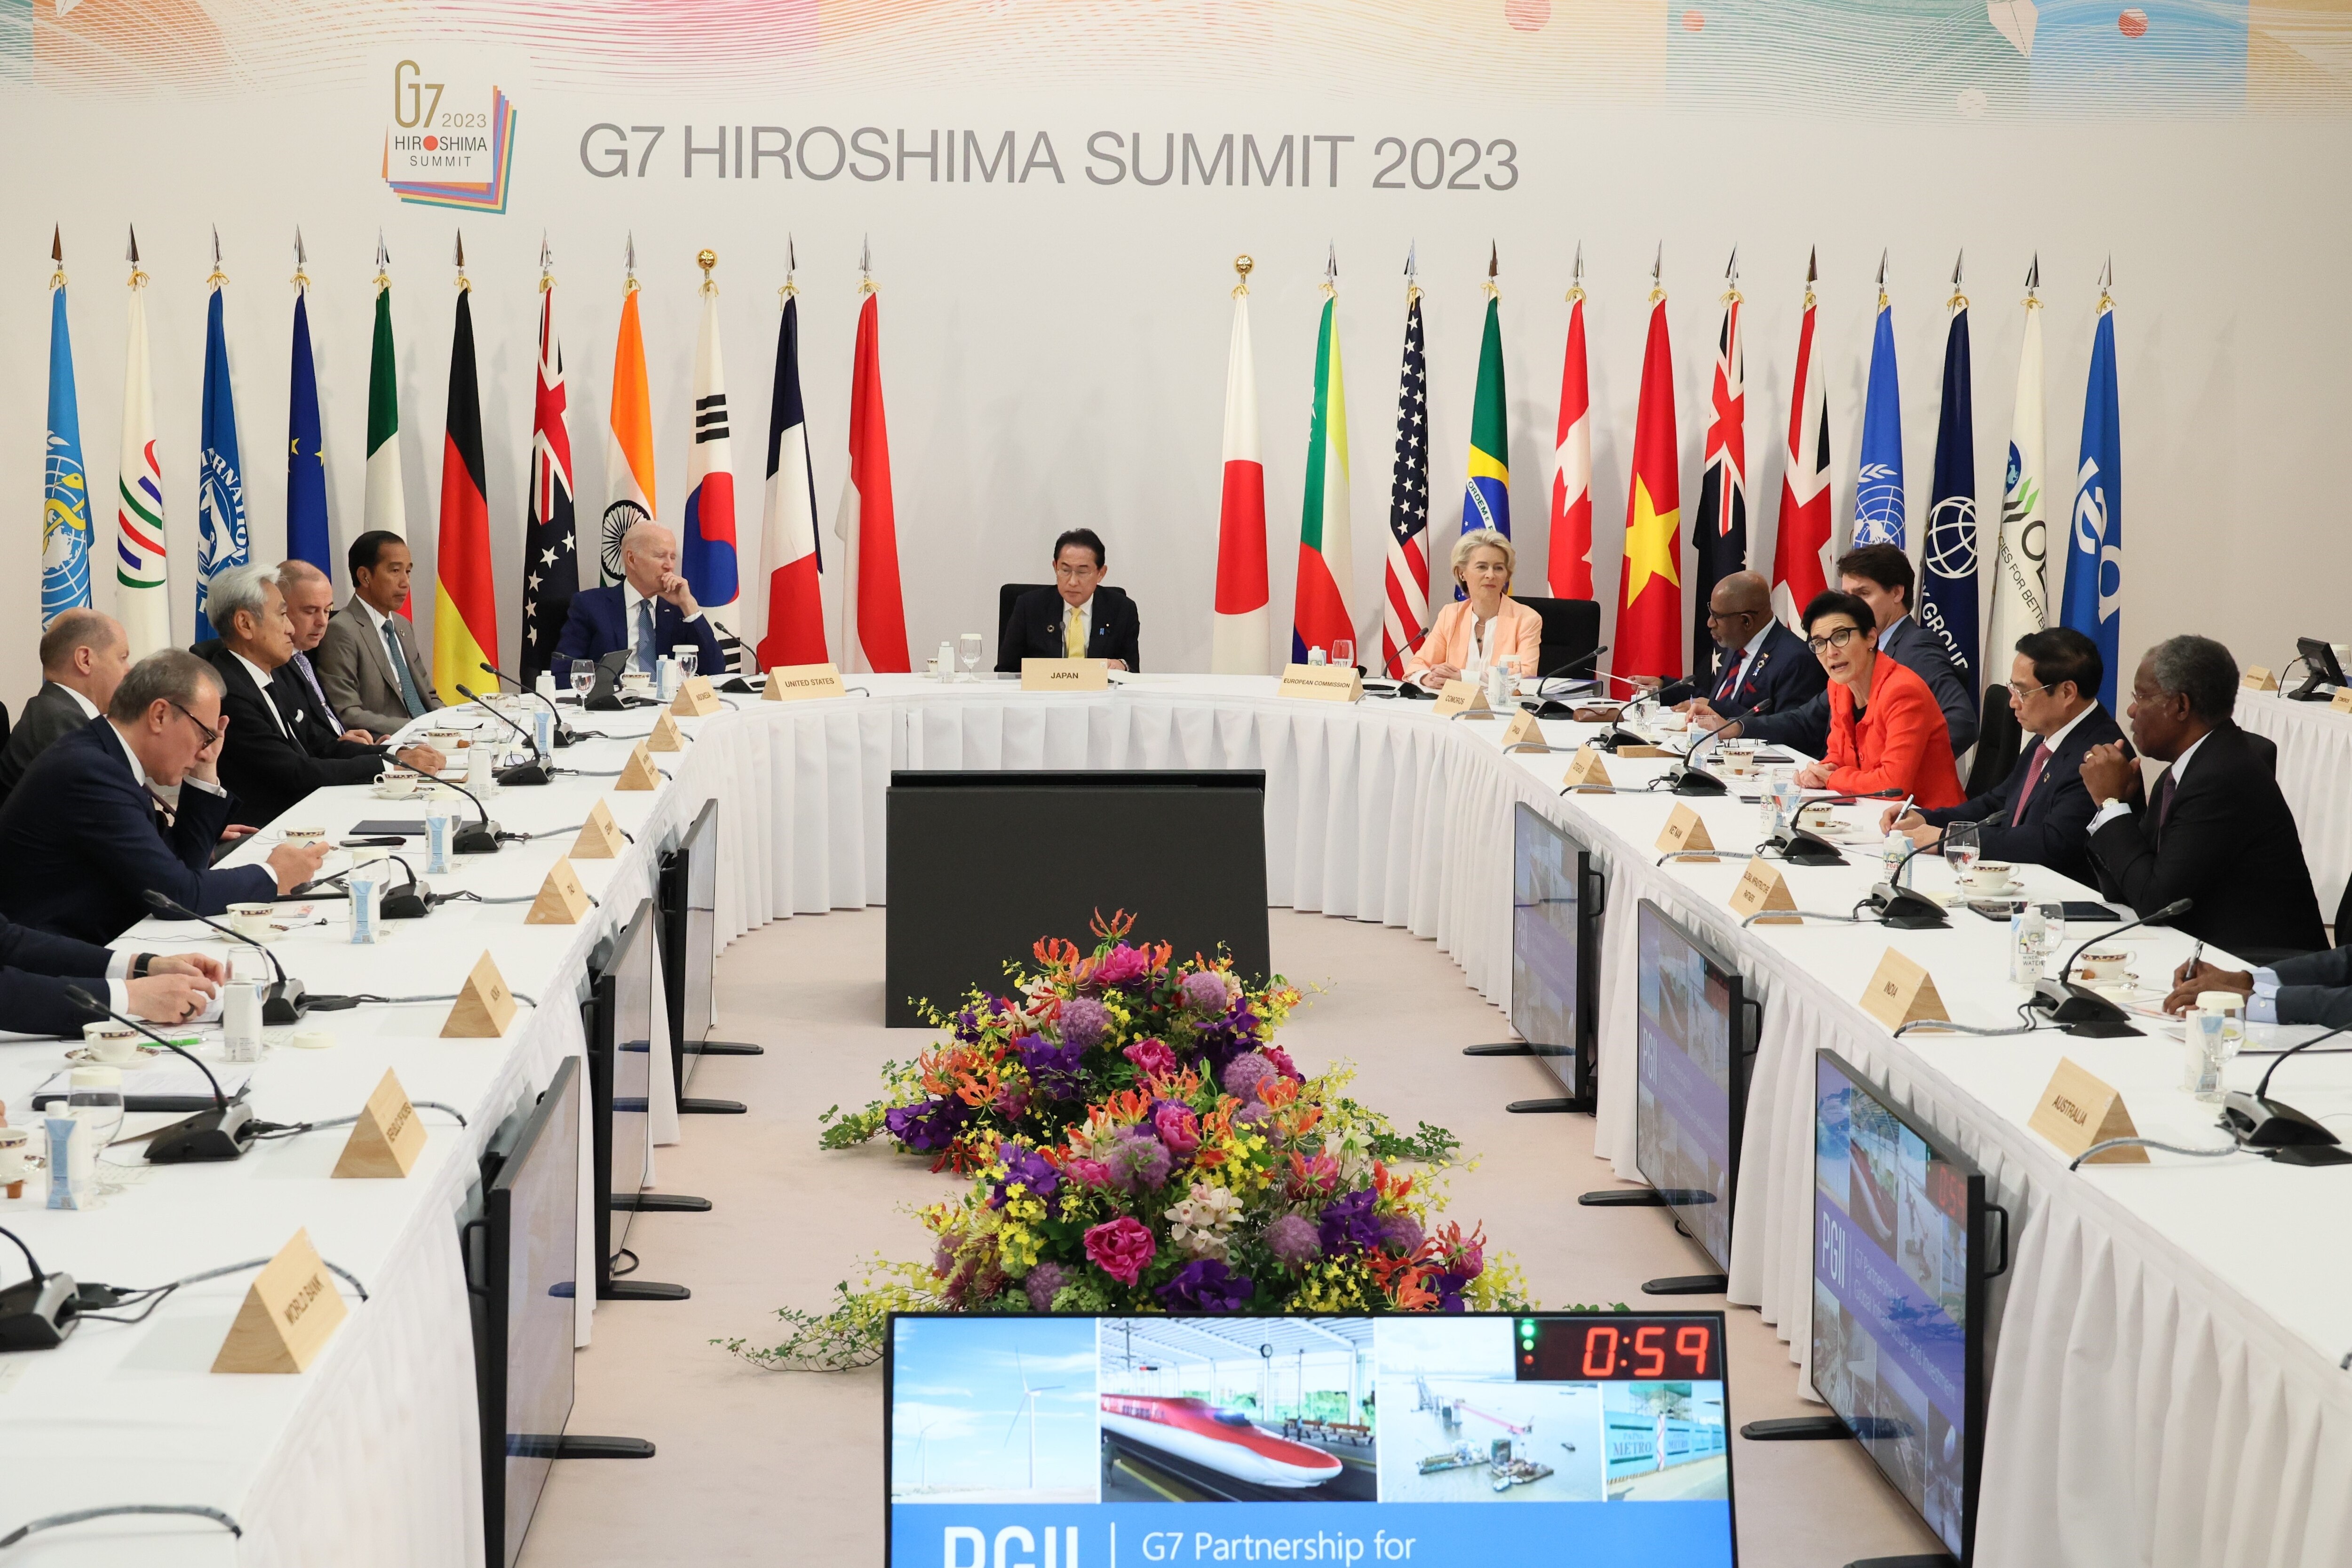 CEO Jane Fraser Speaks at the 2023 G7 Summit in Hiroshima, Japan